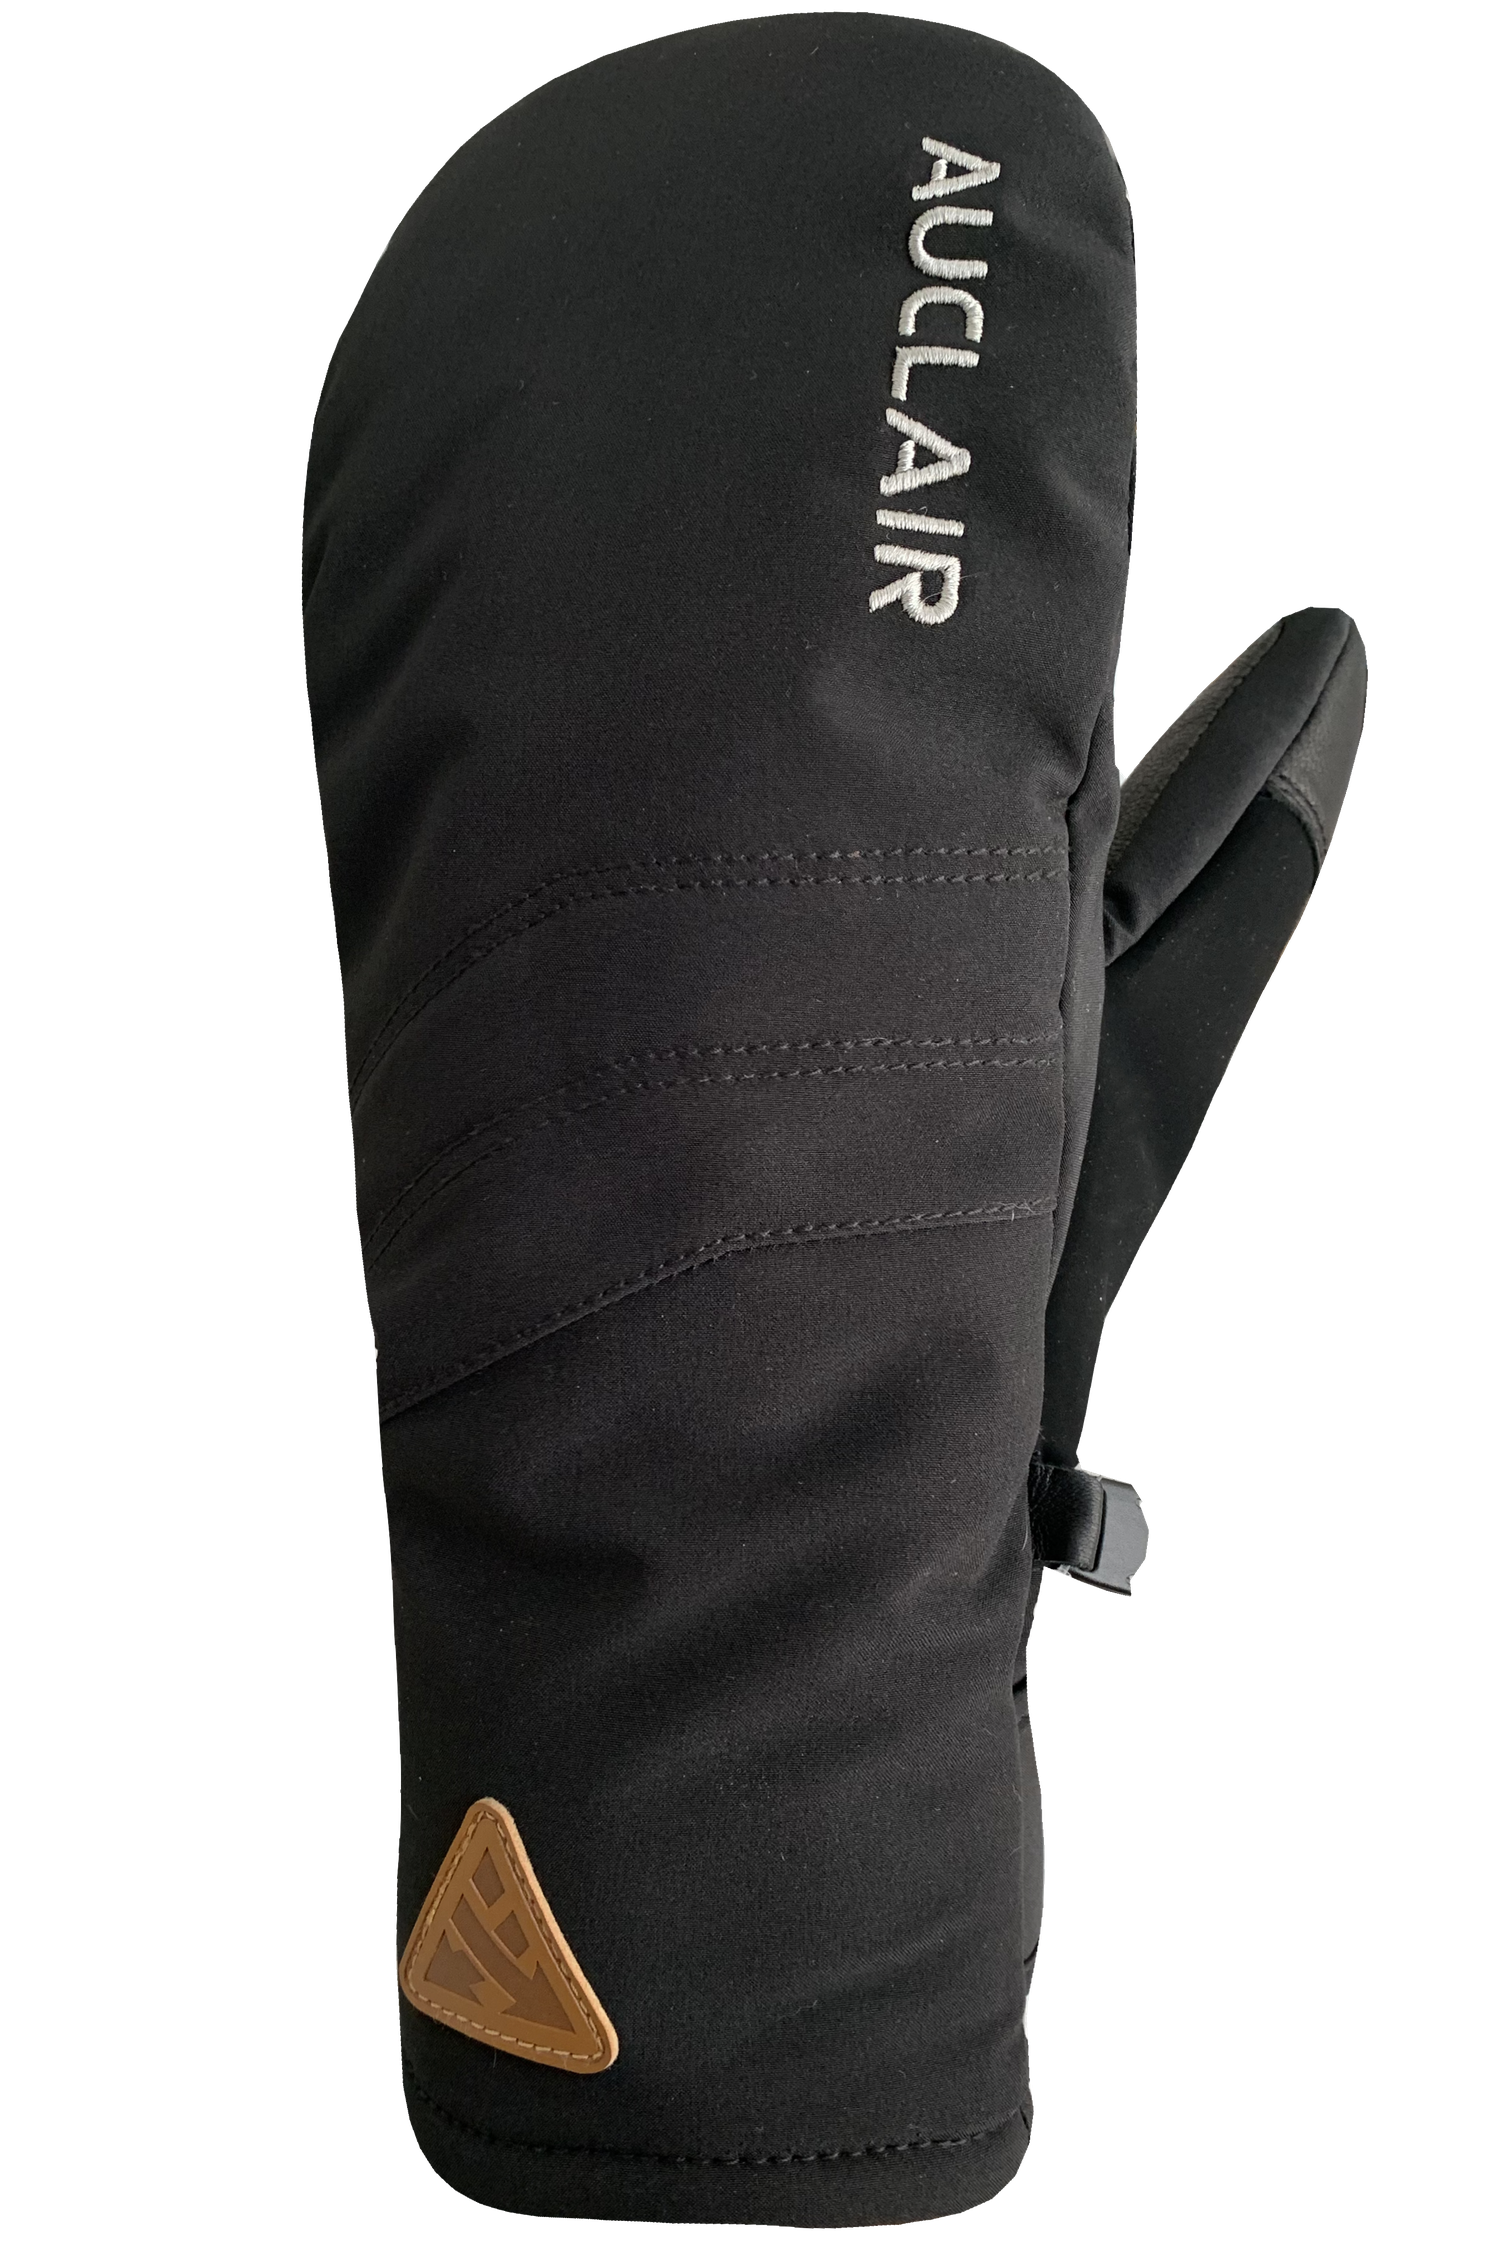 Avalanche Mitts - Adult, Black